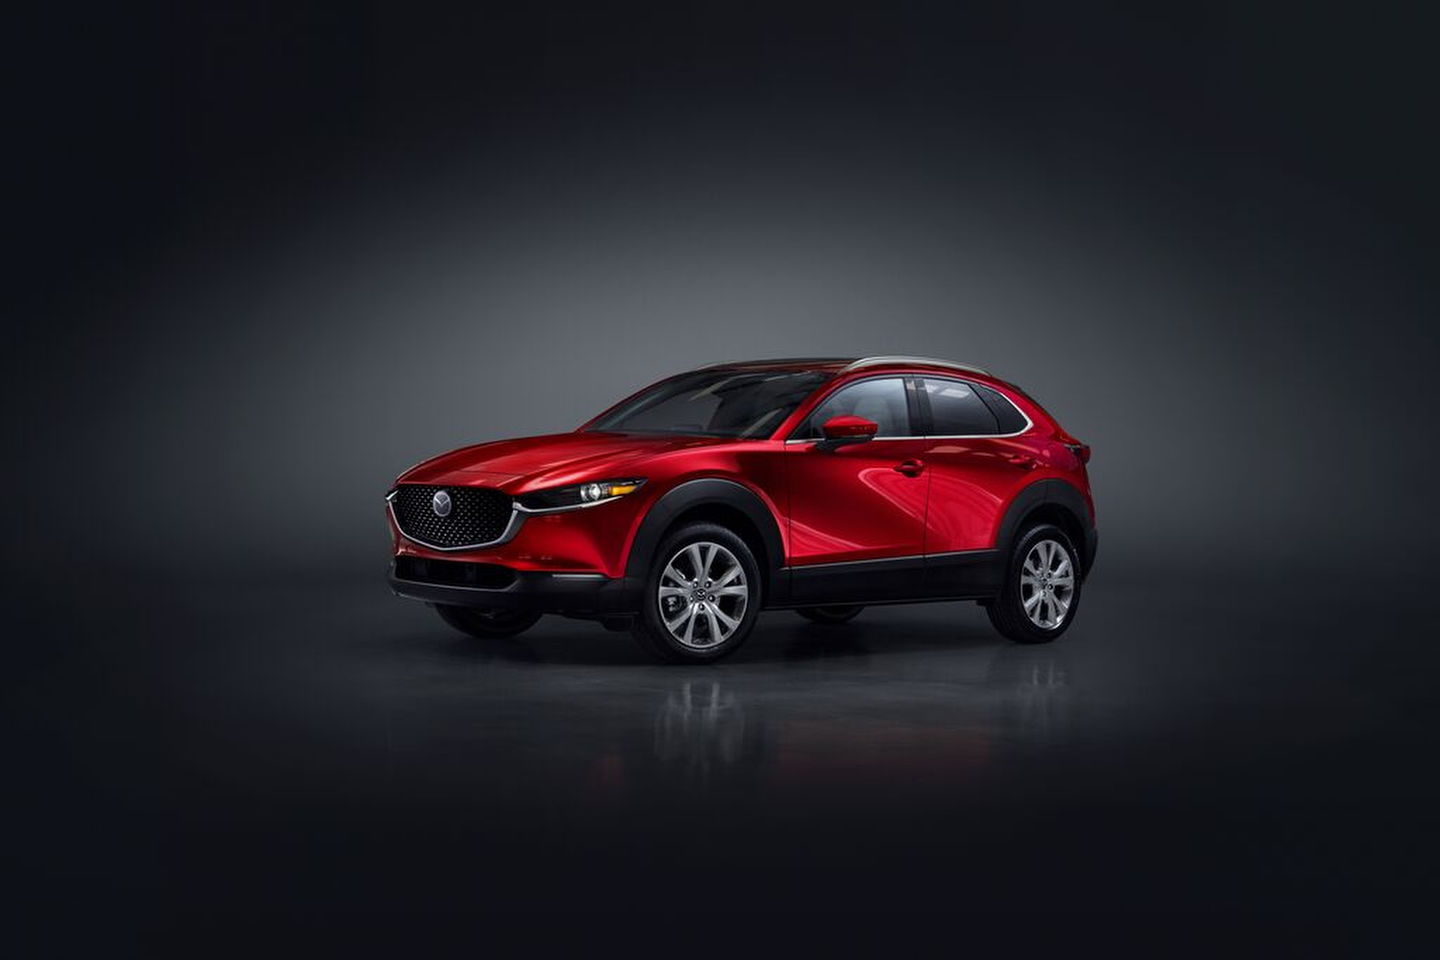 The Mazda CX-30: A Smart Choice for a Pre-Owned SUV